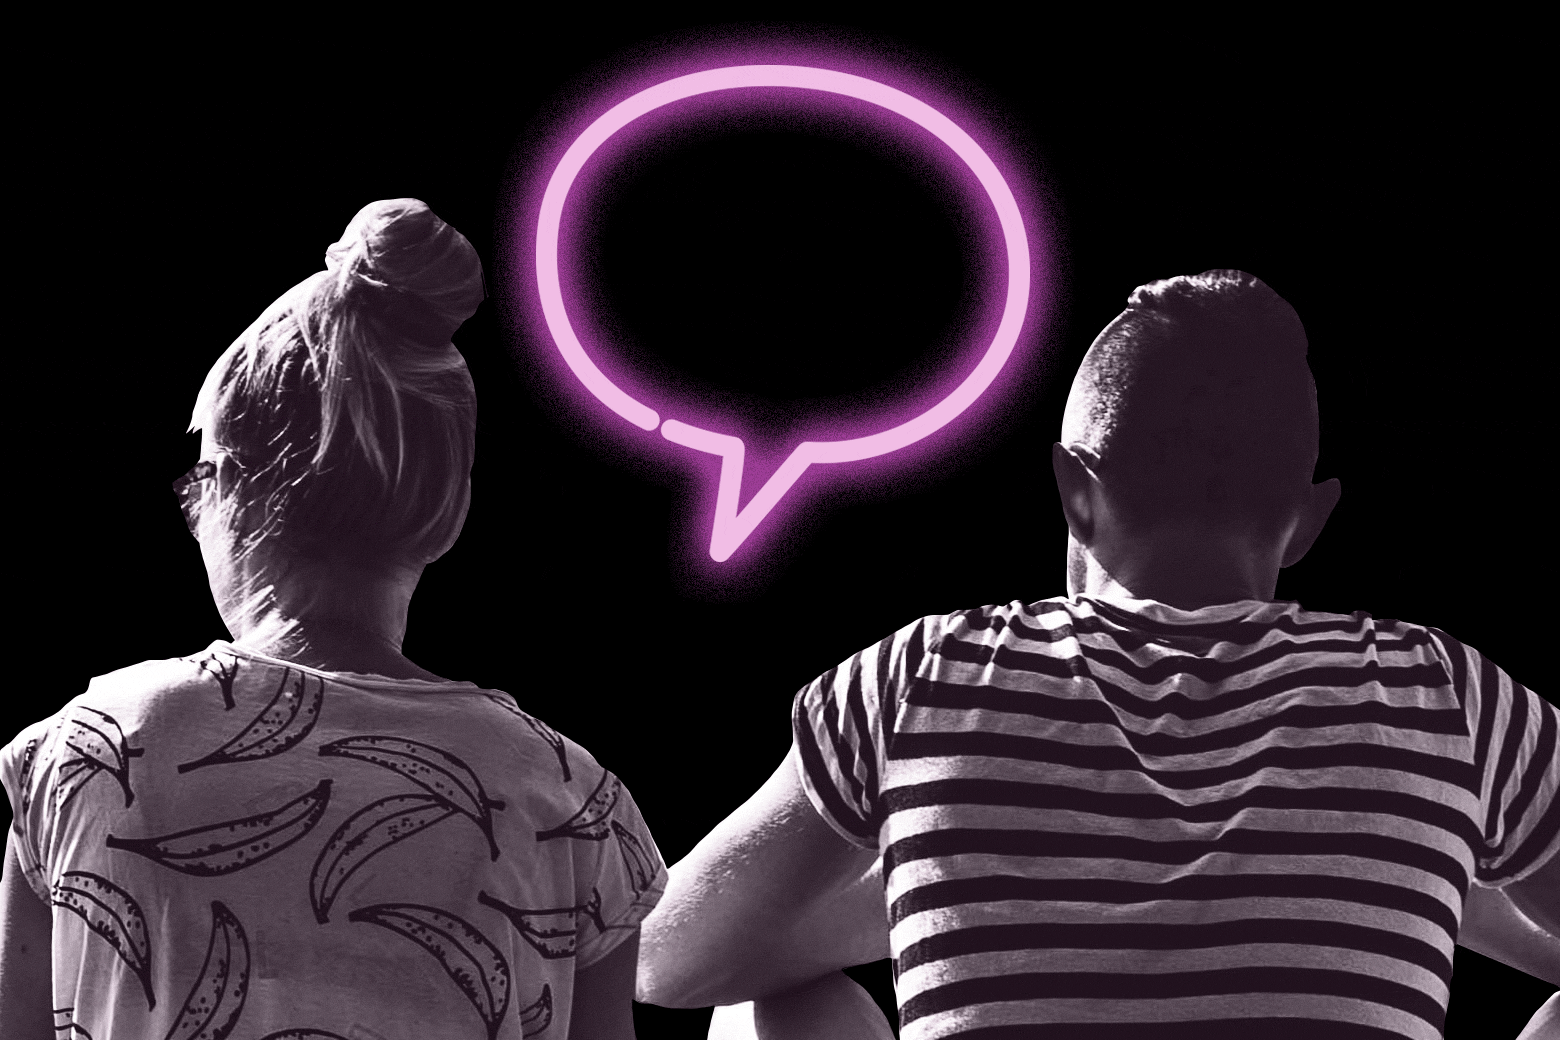 A couple sitting side by side, not talking, with an empty neon speech bubble between them.